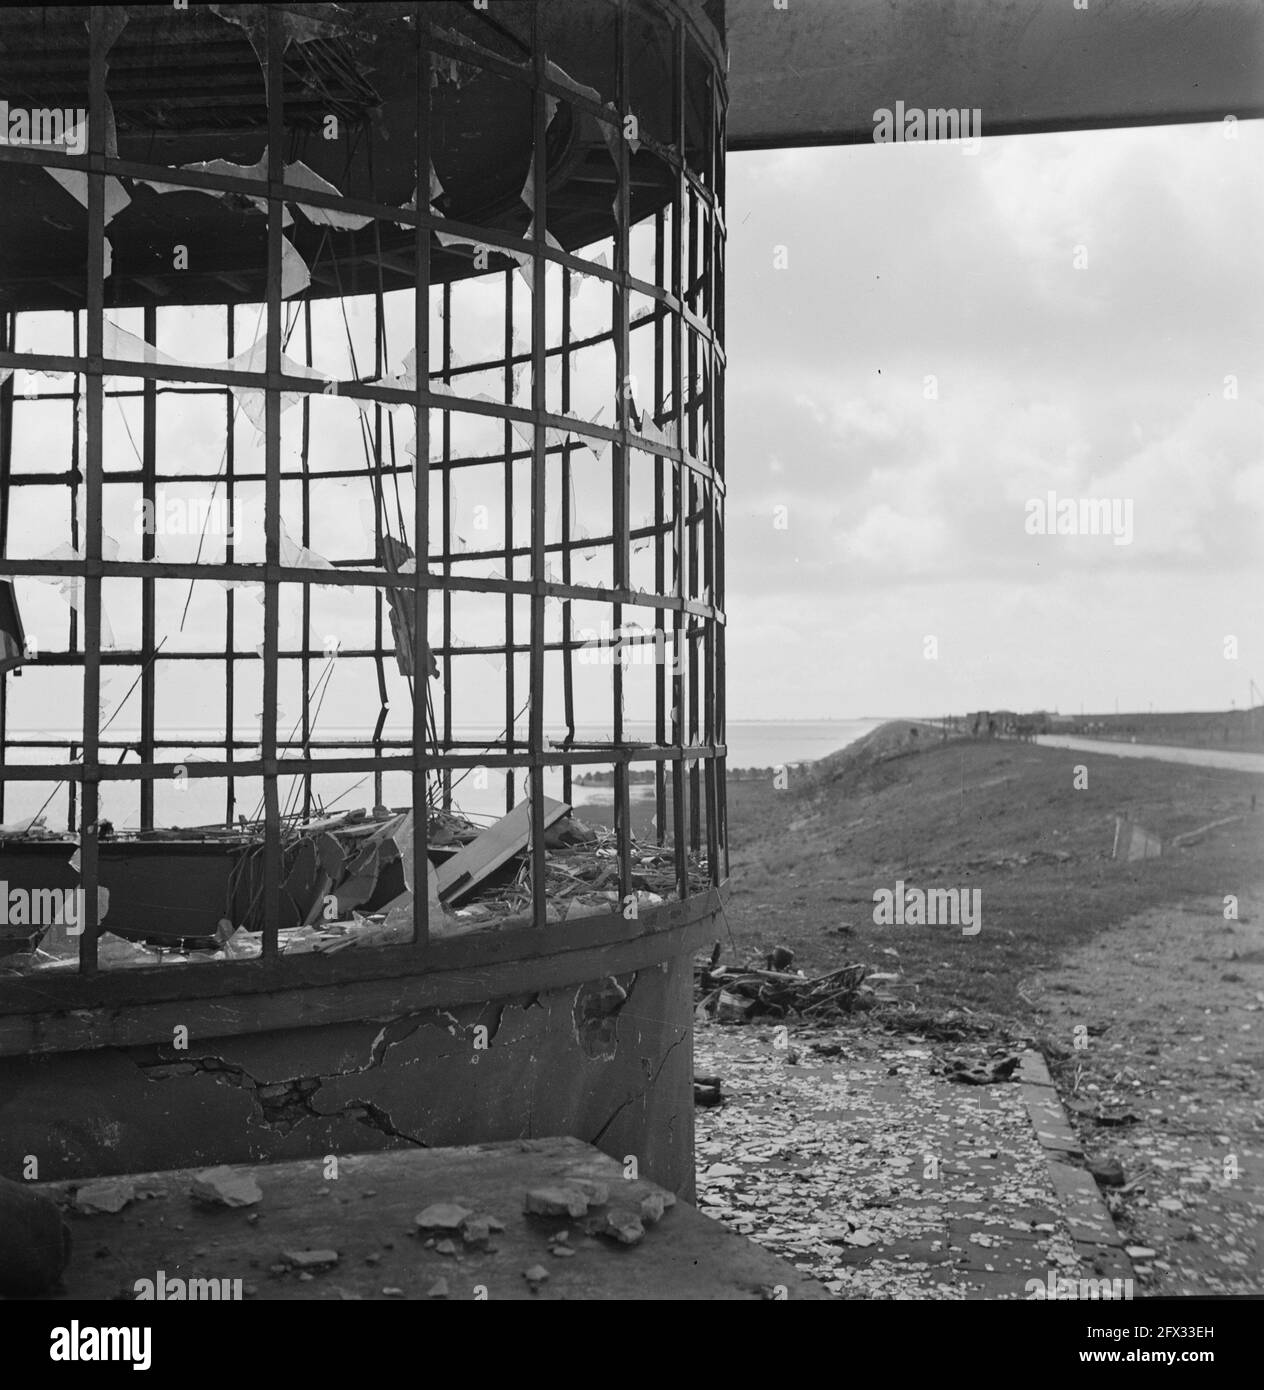 With the liberation of the Northern Netherlands, the Allied troops have taken control of the positions at the Afsluitdijk near Zurich (Friesland). They can now oversee the German positions. The enemy is still nesting on the Kornwernerzand strip. Destroyed gas station at the head of the Afsluitdijk, April 1945, devastation, The Netherlands, 20th century press agency photo, news to remember, documentary, historic photography 1945-1990, visual stories, human history of the Twentieth Century, capturing moments in time Stock Photo